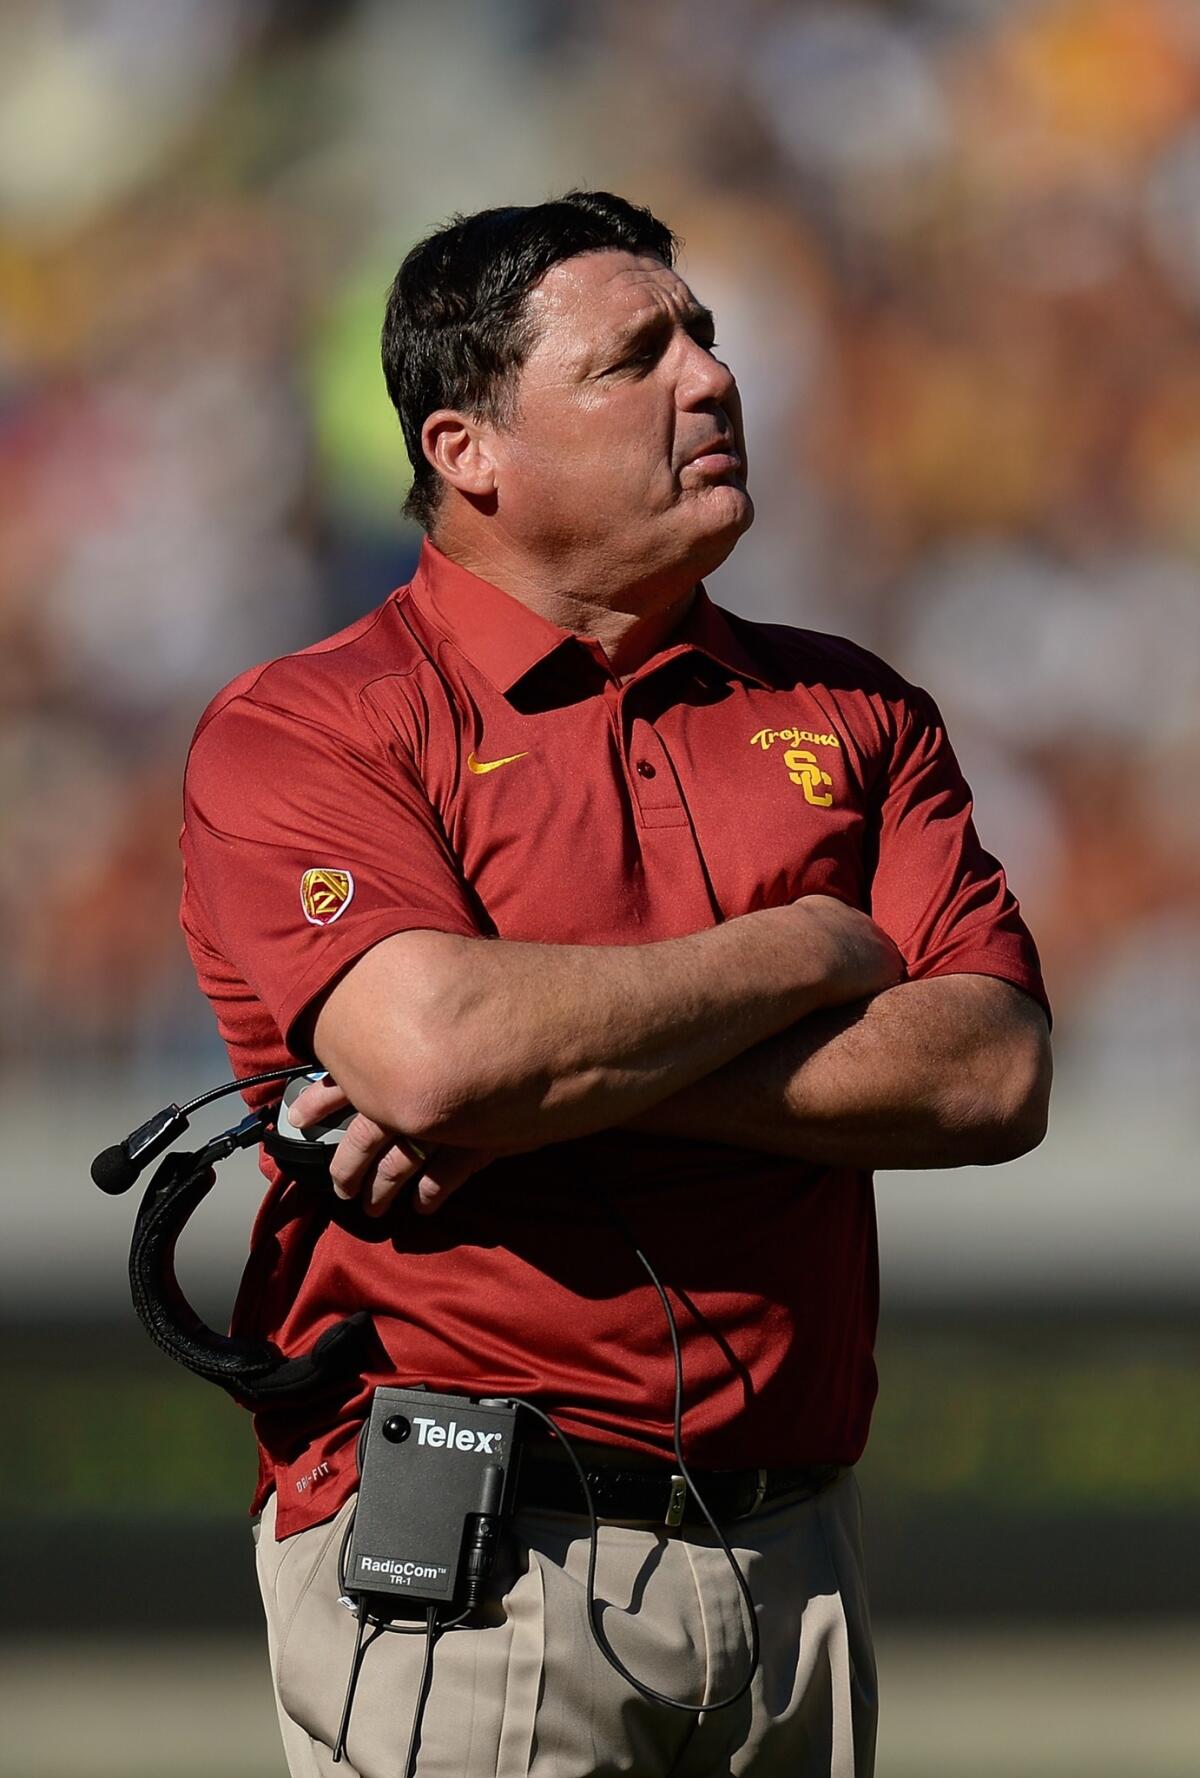 USC Interim Coach Ed Orgeron says stopping UCLA quarterback Brett Hundley from running the ball and making long passes will be crucial to the Trojans' success on Saturday.